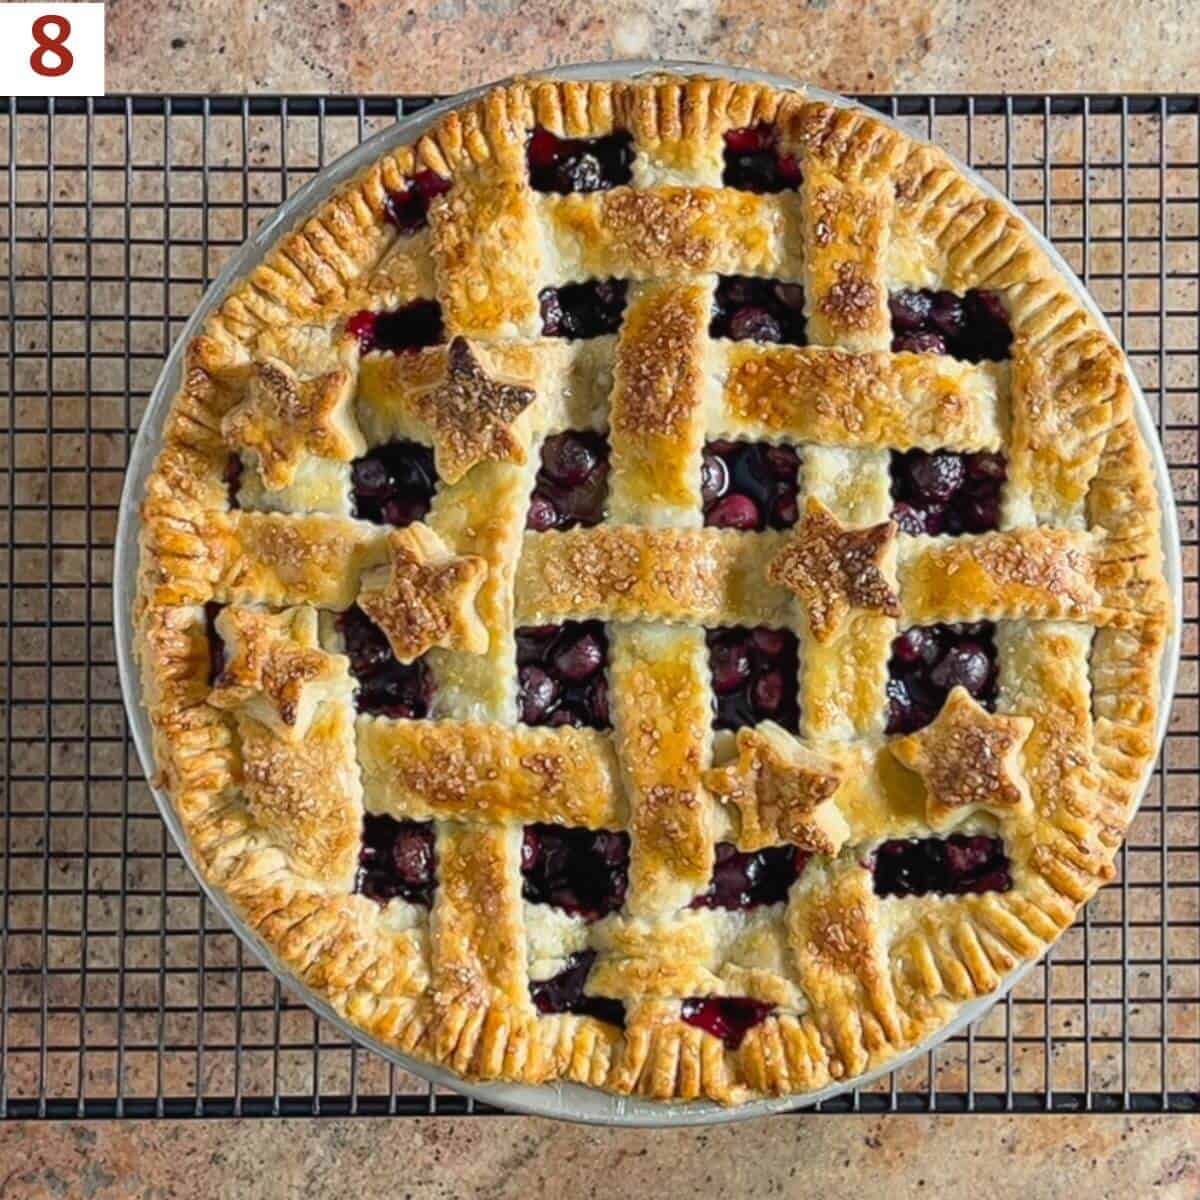 Finished baked blueberry pie on a cooling rack from overhead.